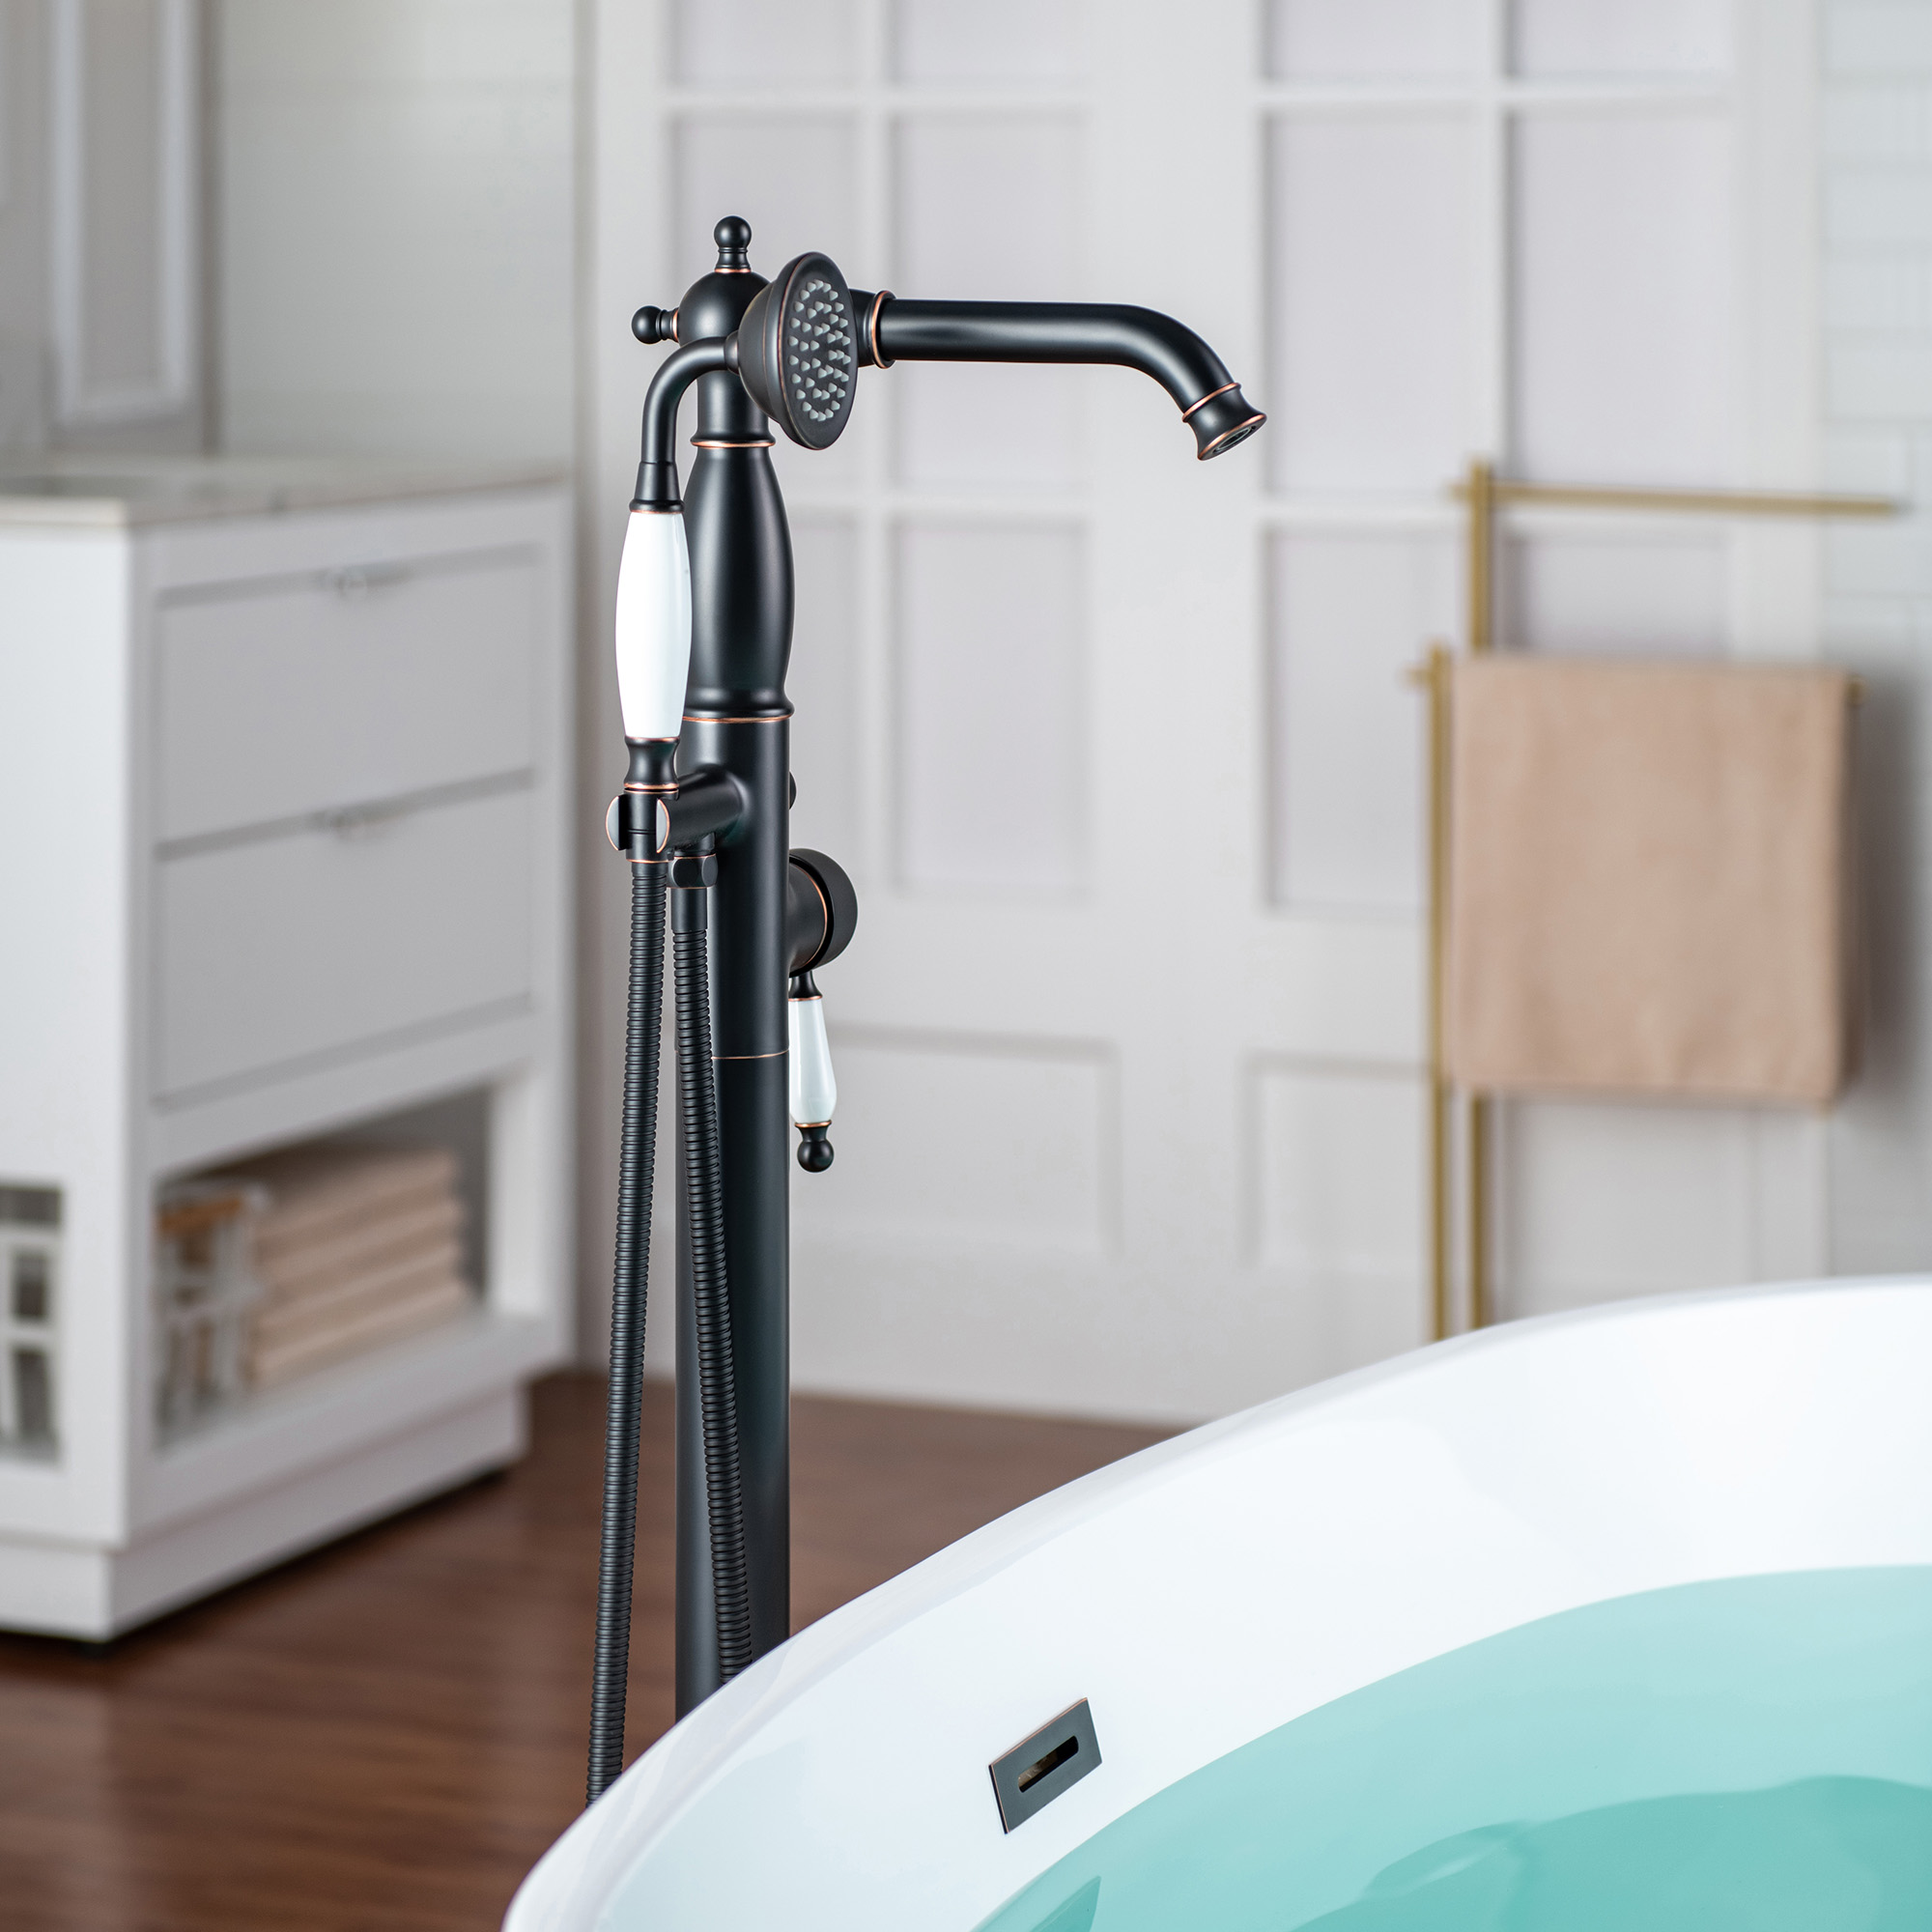  WOODBRIDGE F0049ORB Fusion Single Handle Floor Mount Freestanding Tub Filler Faucet with Telephone Hand shower in Oil Rubbed Bronze Finish_12274